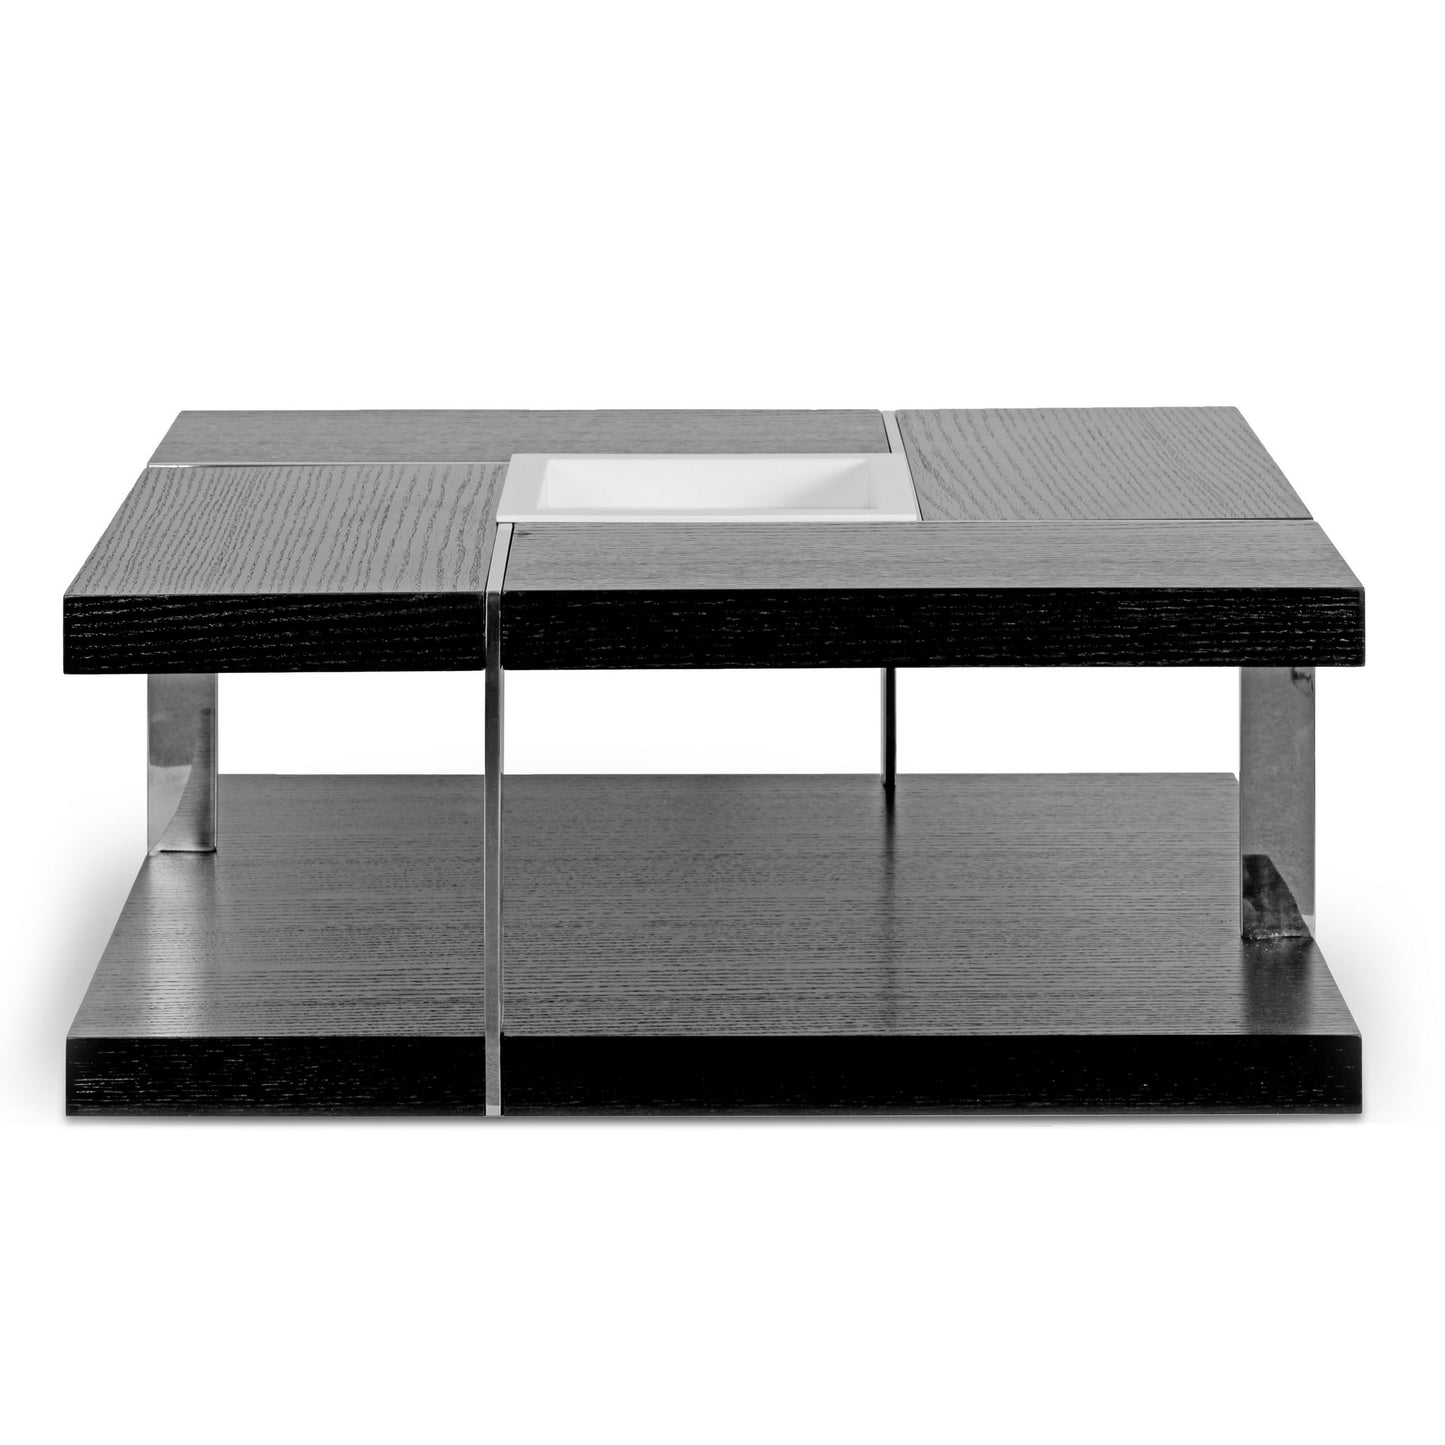 Airi Black Square Coffee Table with Modern White Tray Center and Metal Accent Legs